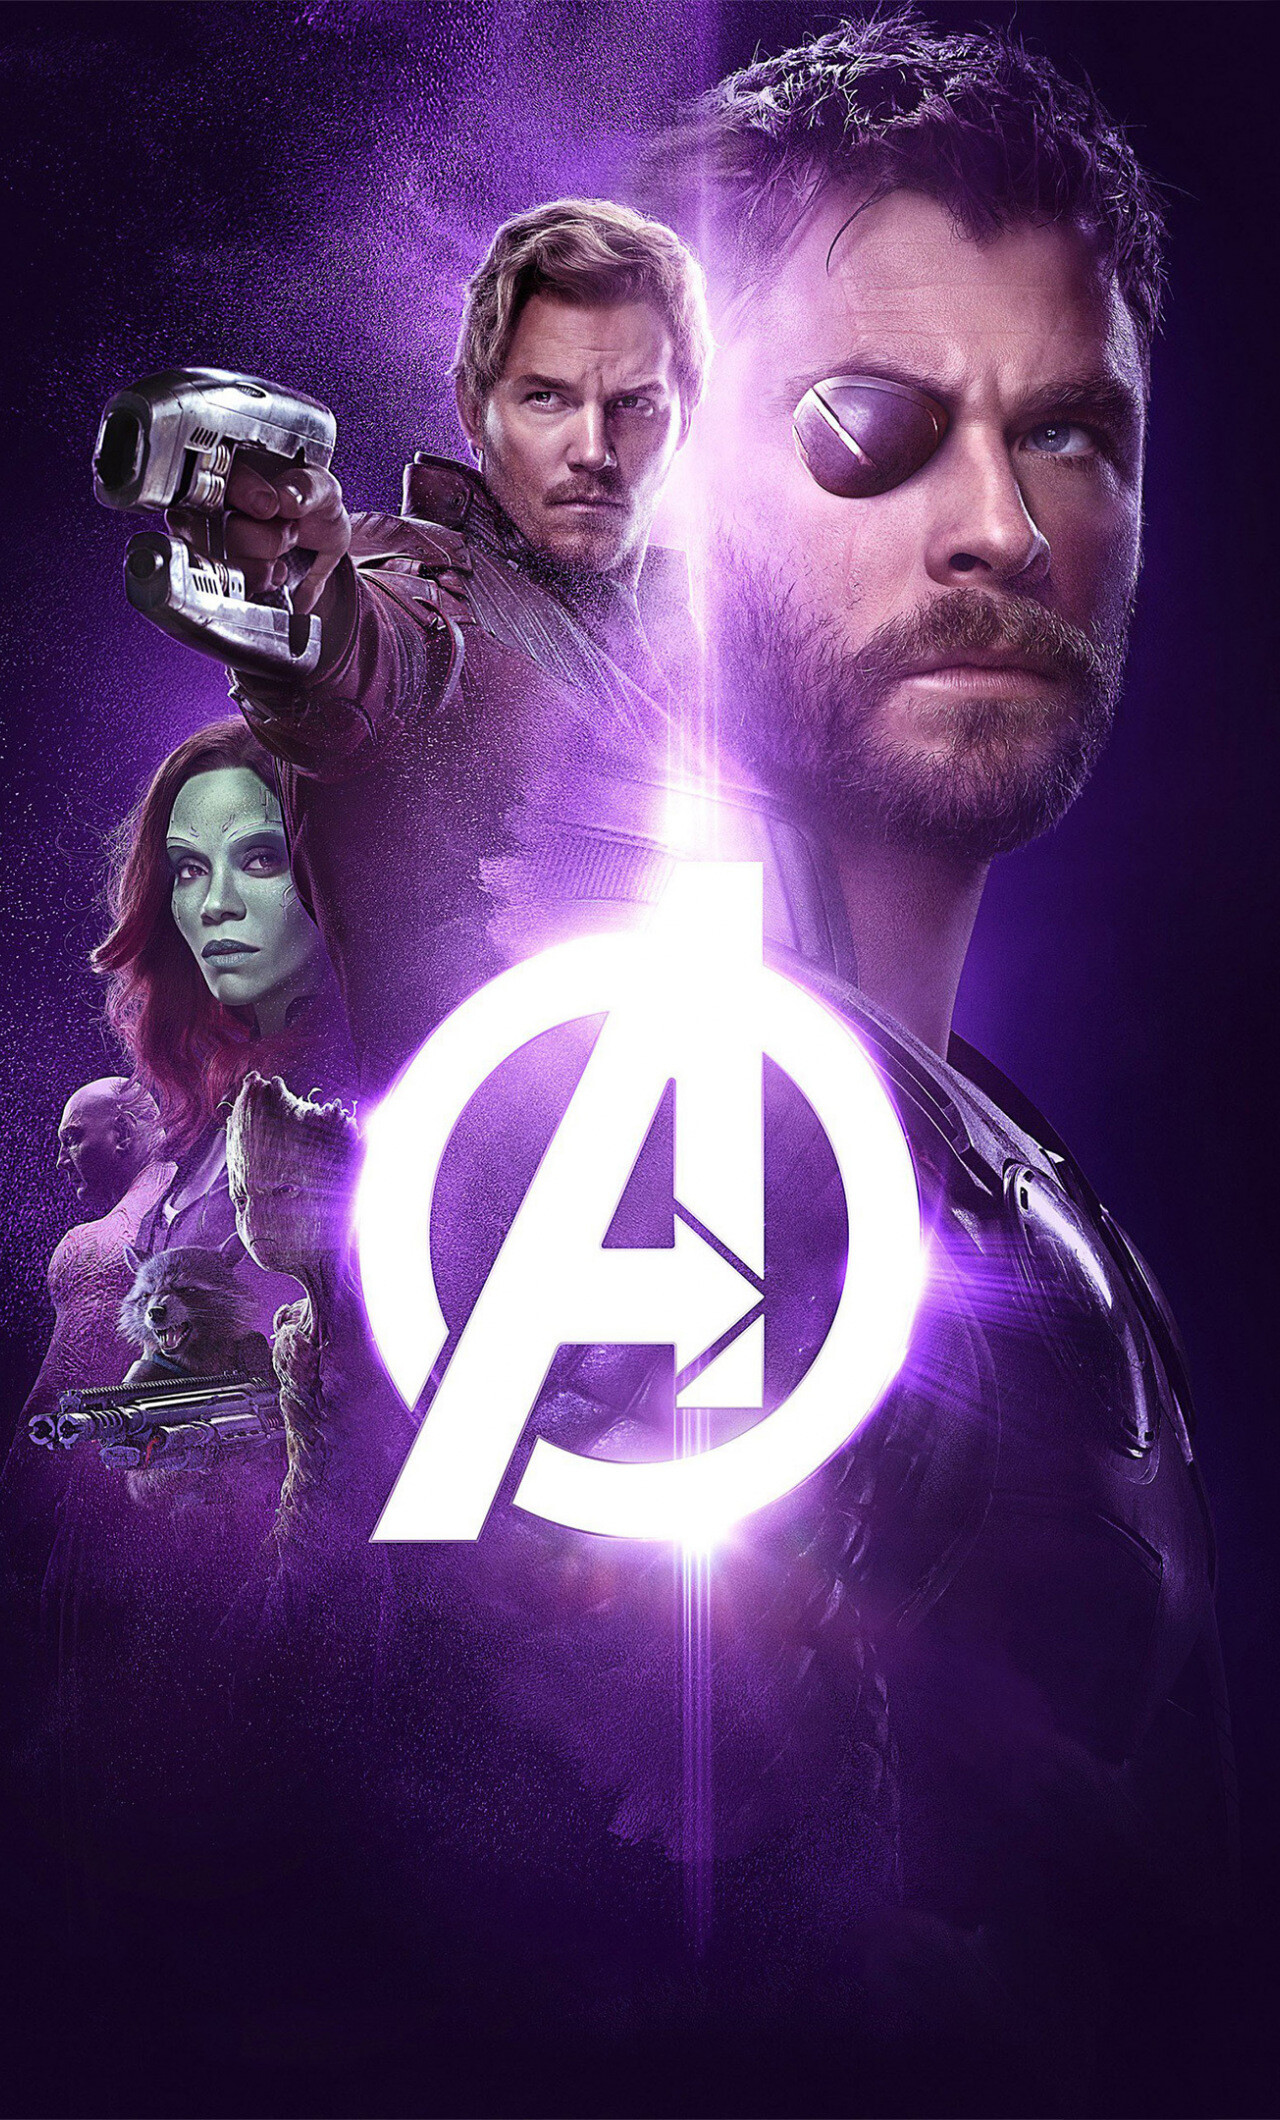 Avengers: Infinity War, The darkest and most intense, violent, and confronting Marvel movie to date. 1280x2120 HD Wallpaper.